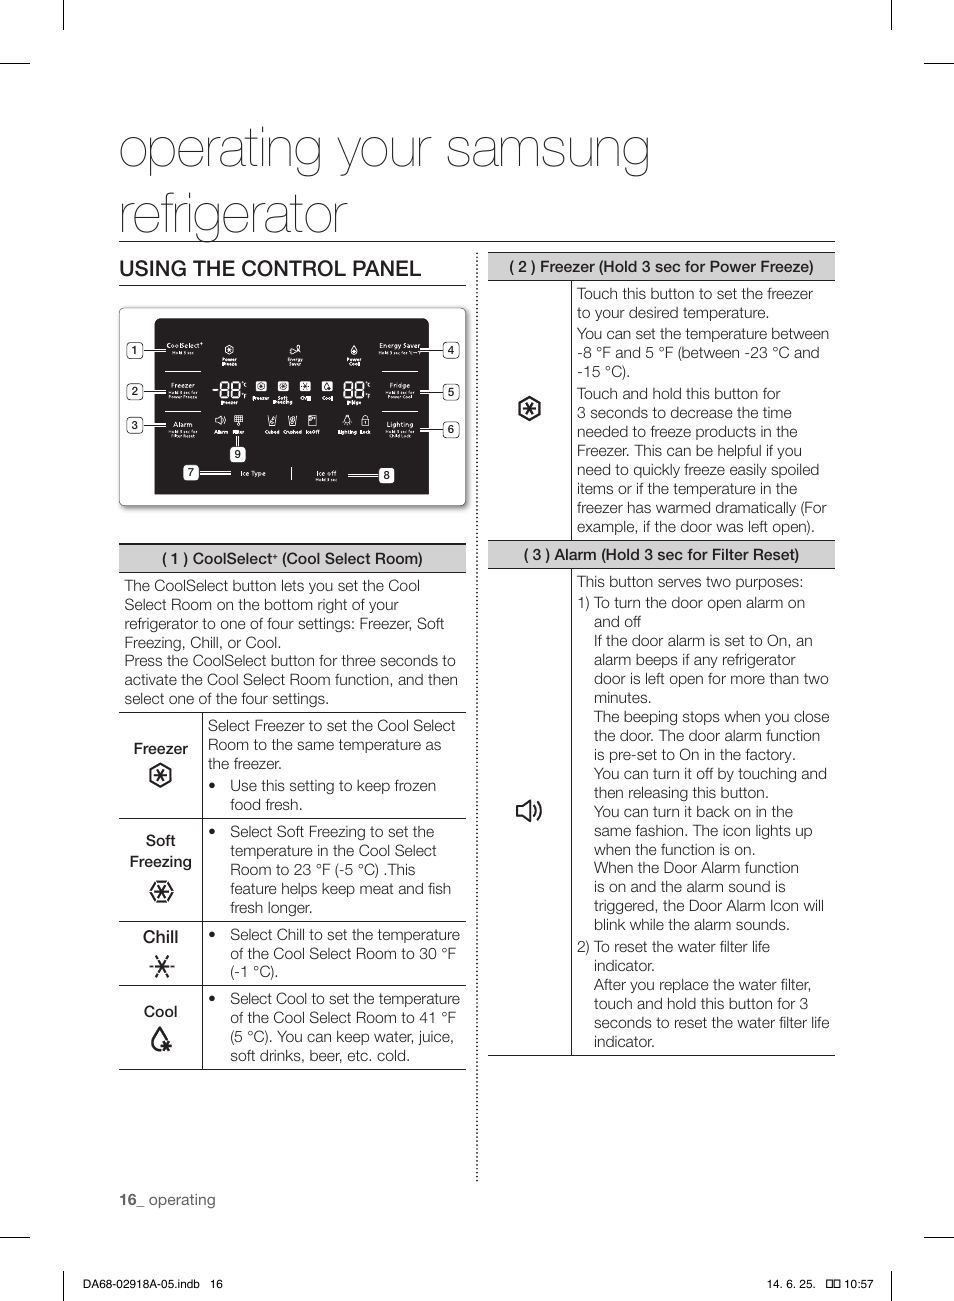 Operating your samsung refrigerator, Using the control panel | Samsung